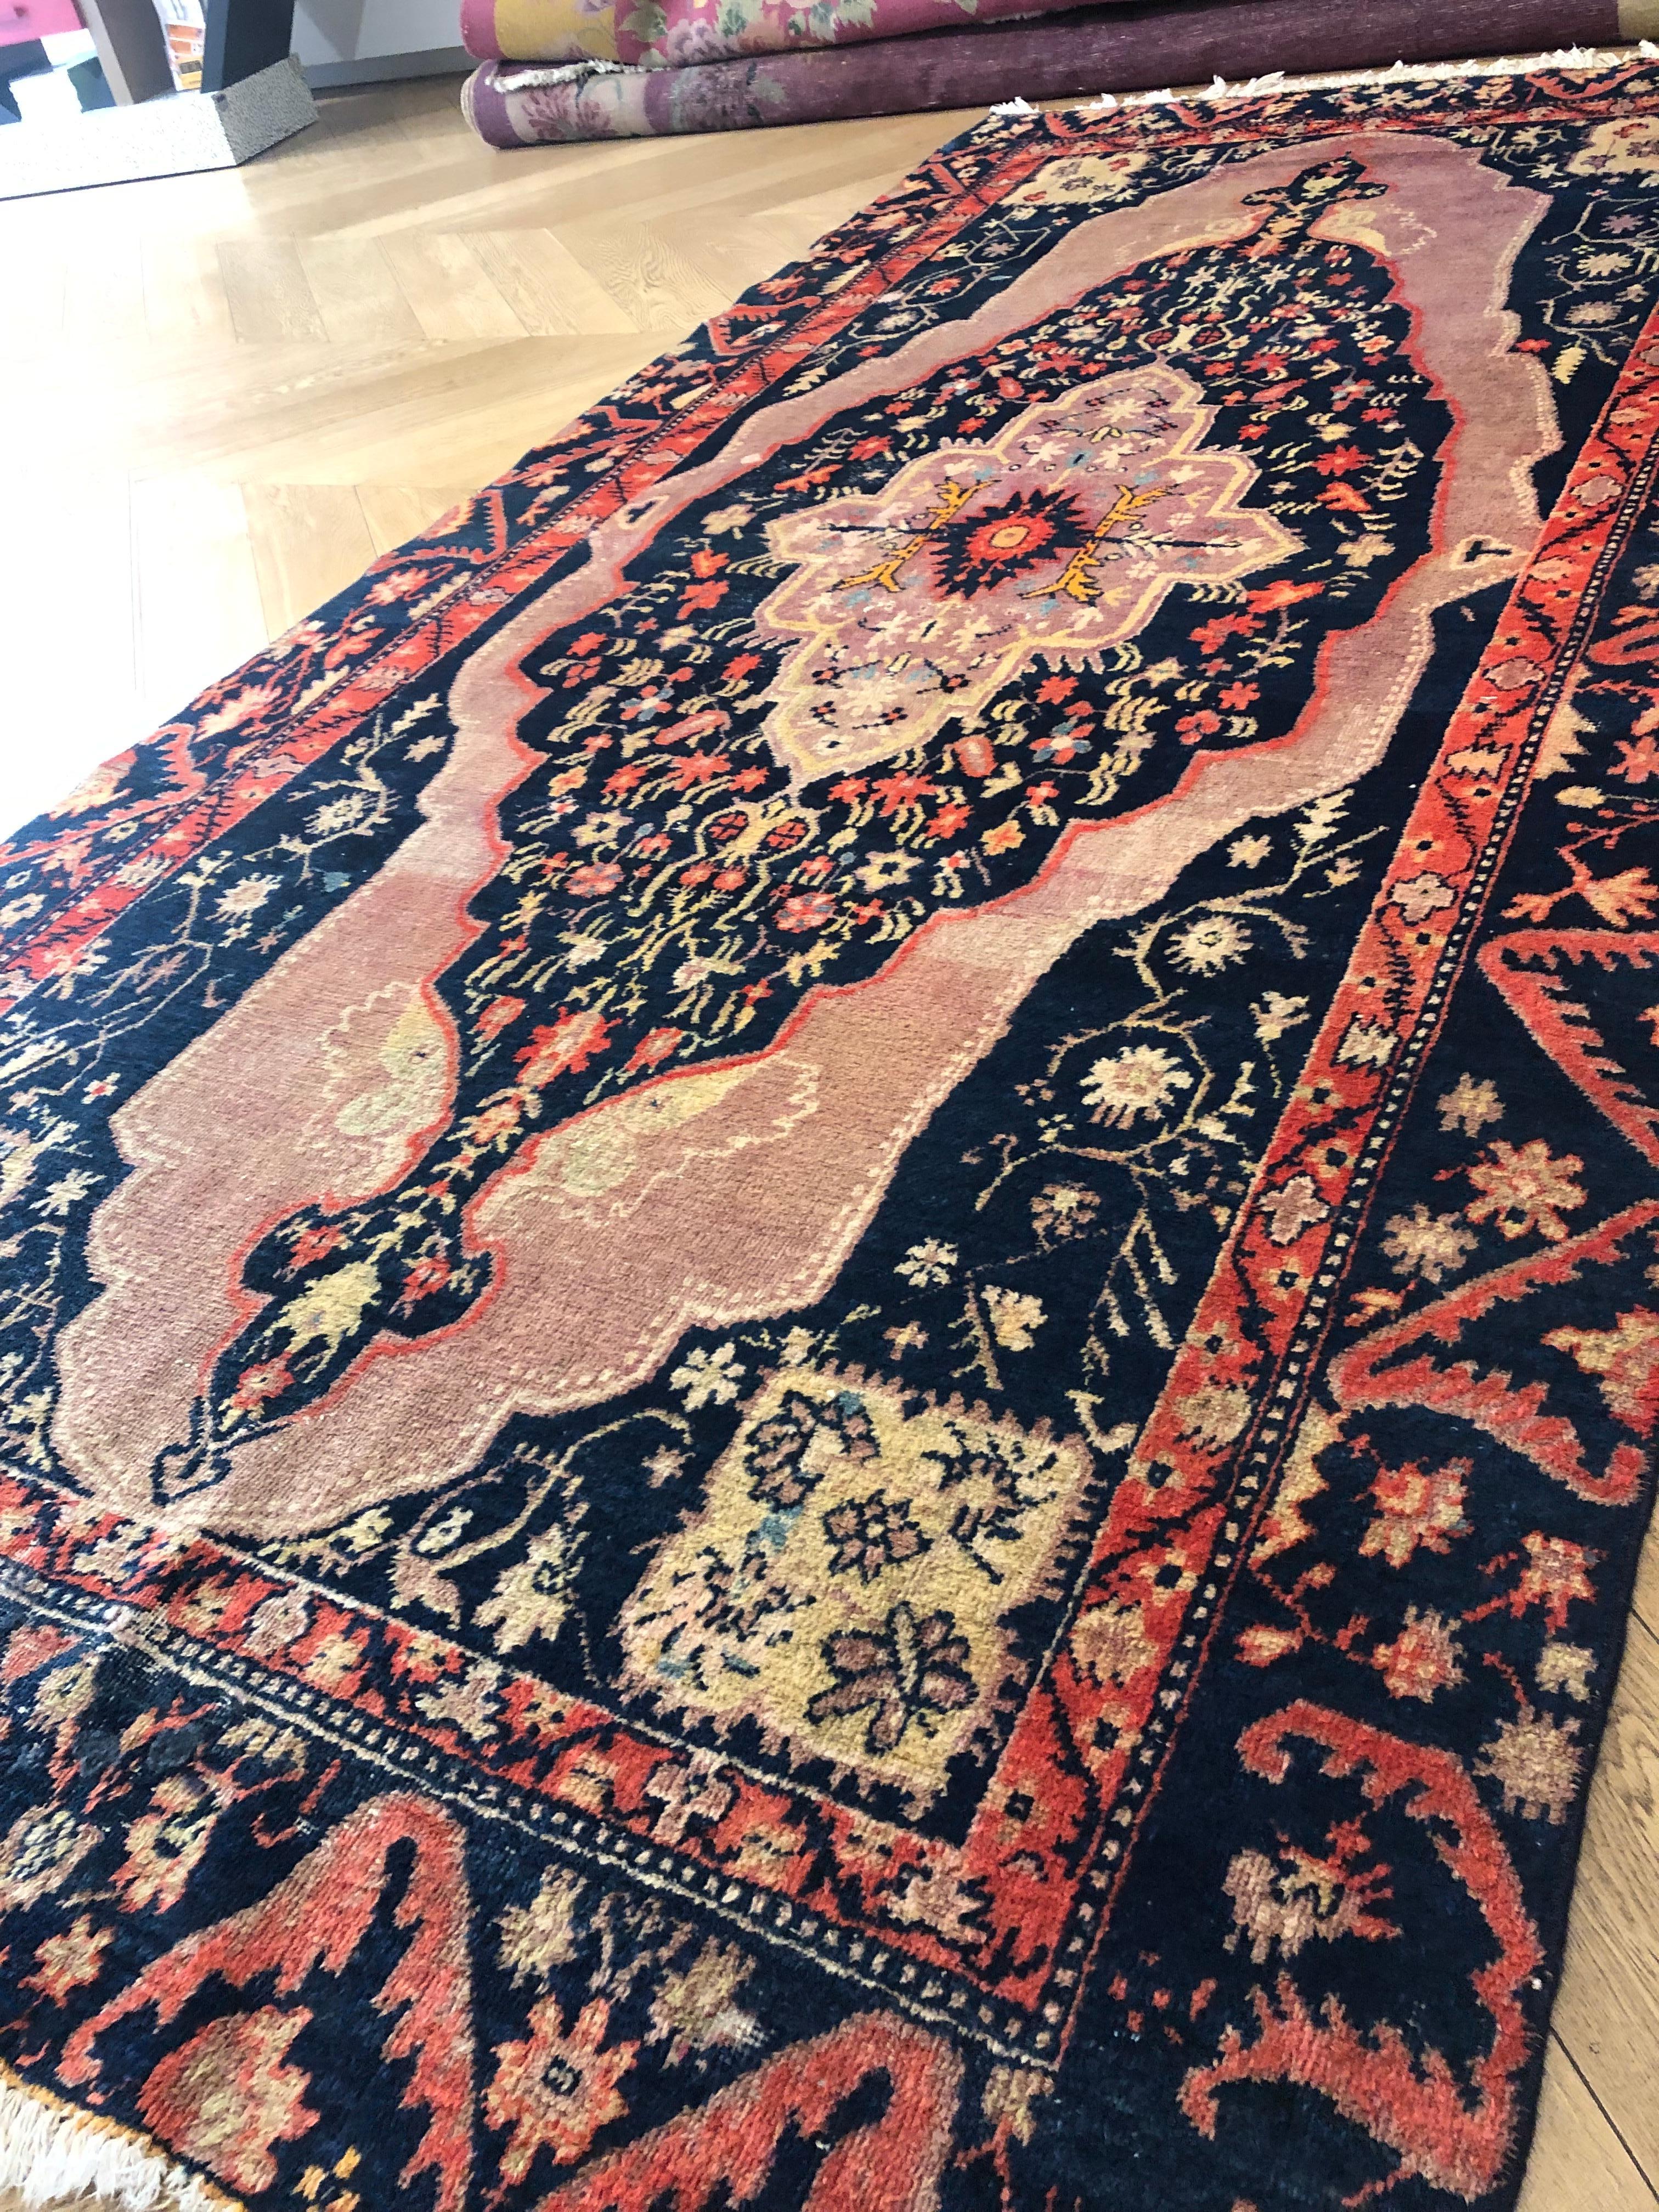 Uzbek 20th Century Pink and Blue Floreal with Medallion Samarkand Rug, Ca 1920 For Sale